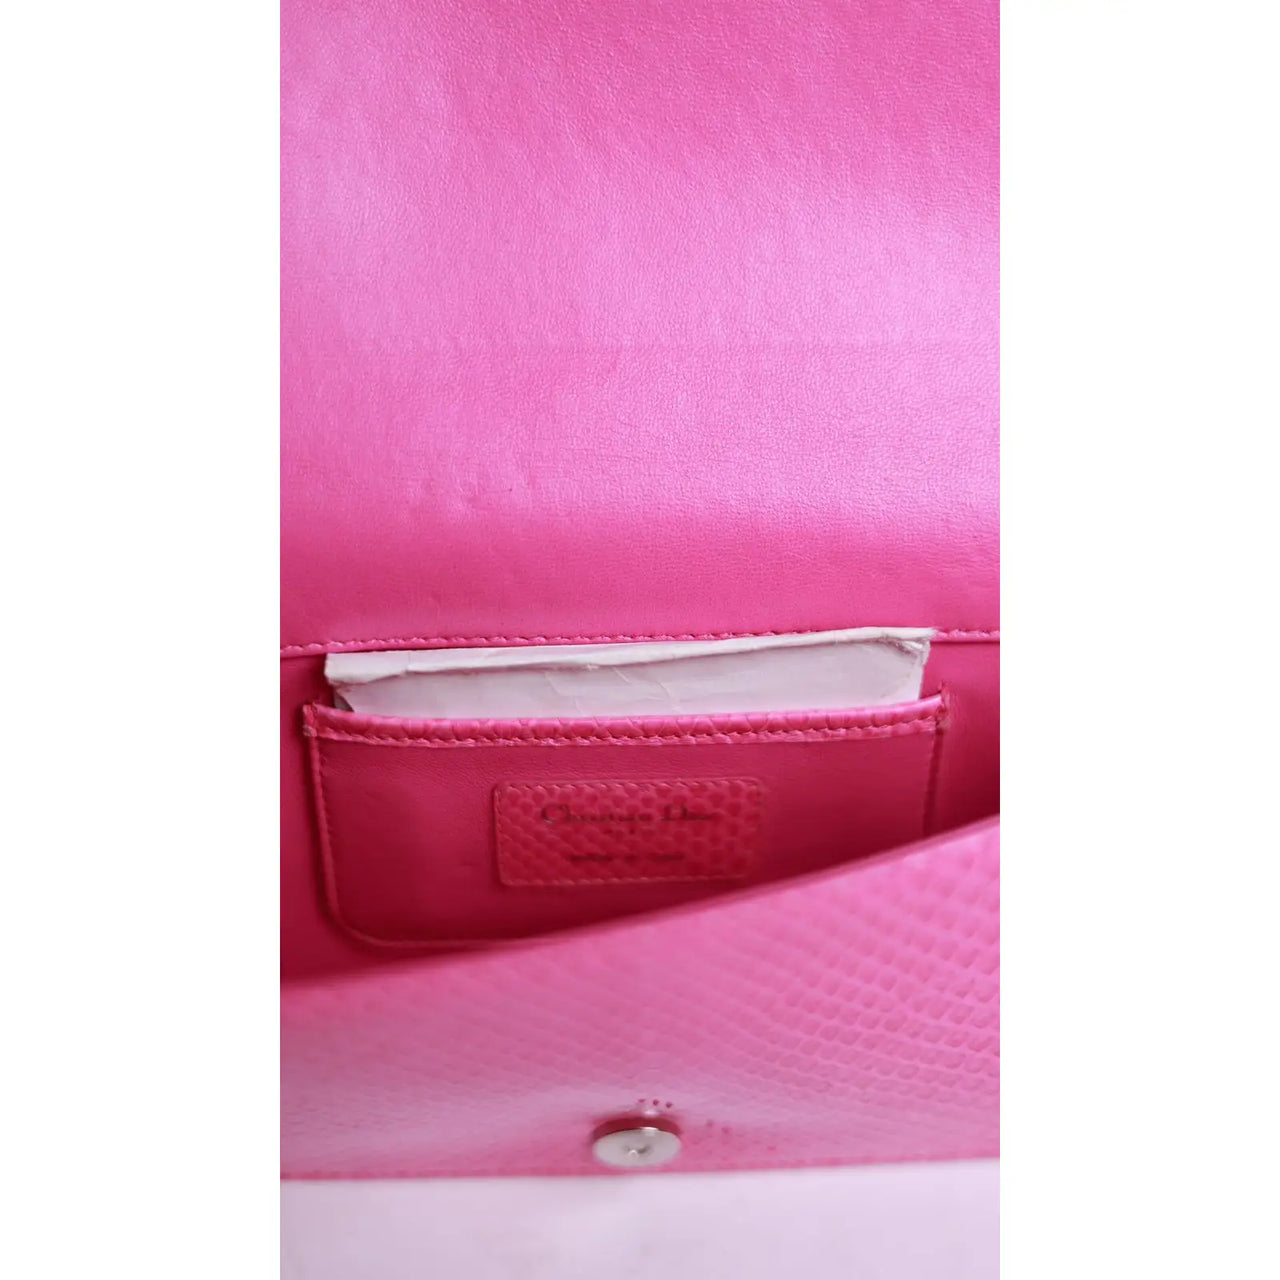 Chloé - Authenticated Clutch Bag - Pink for Women, Never Worn